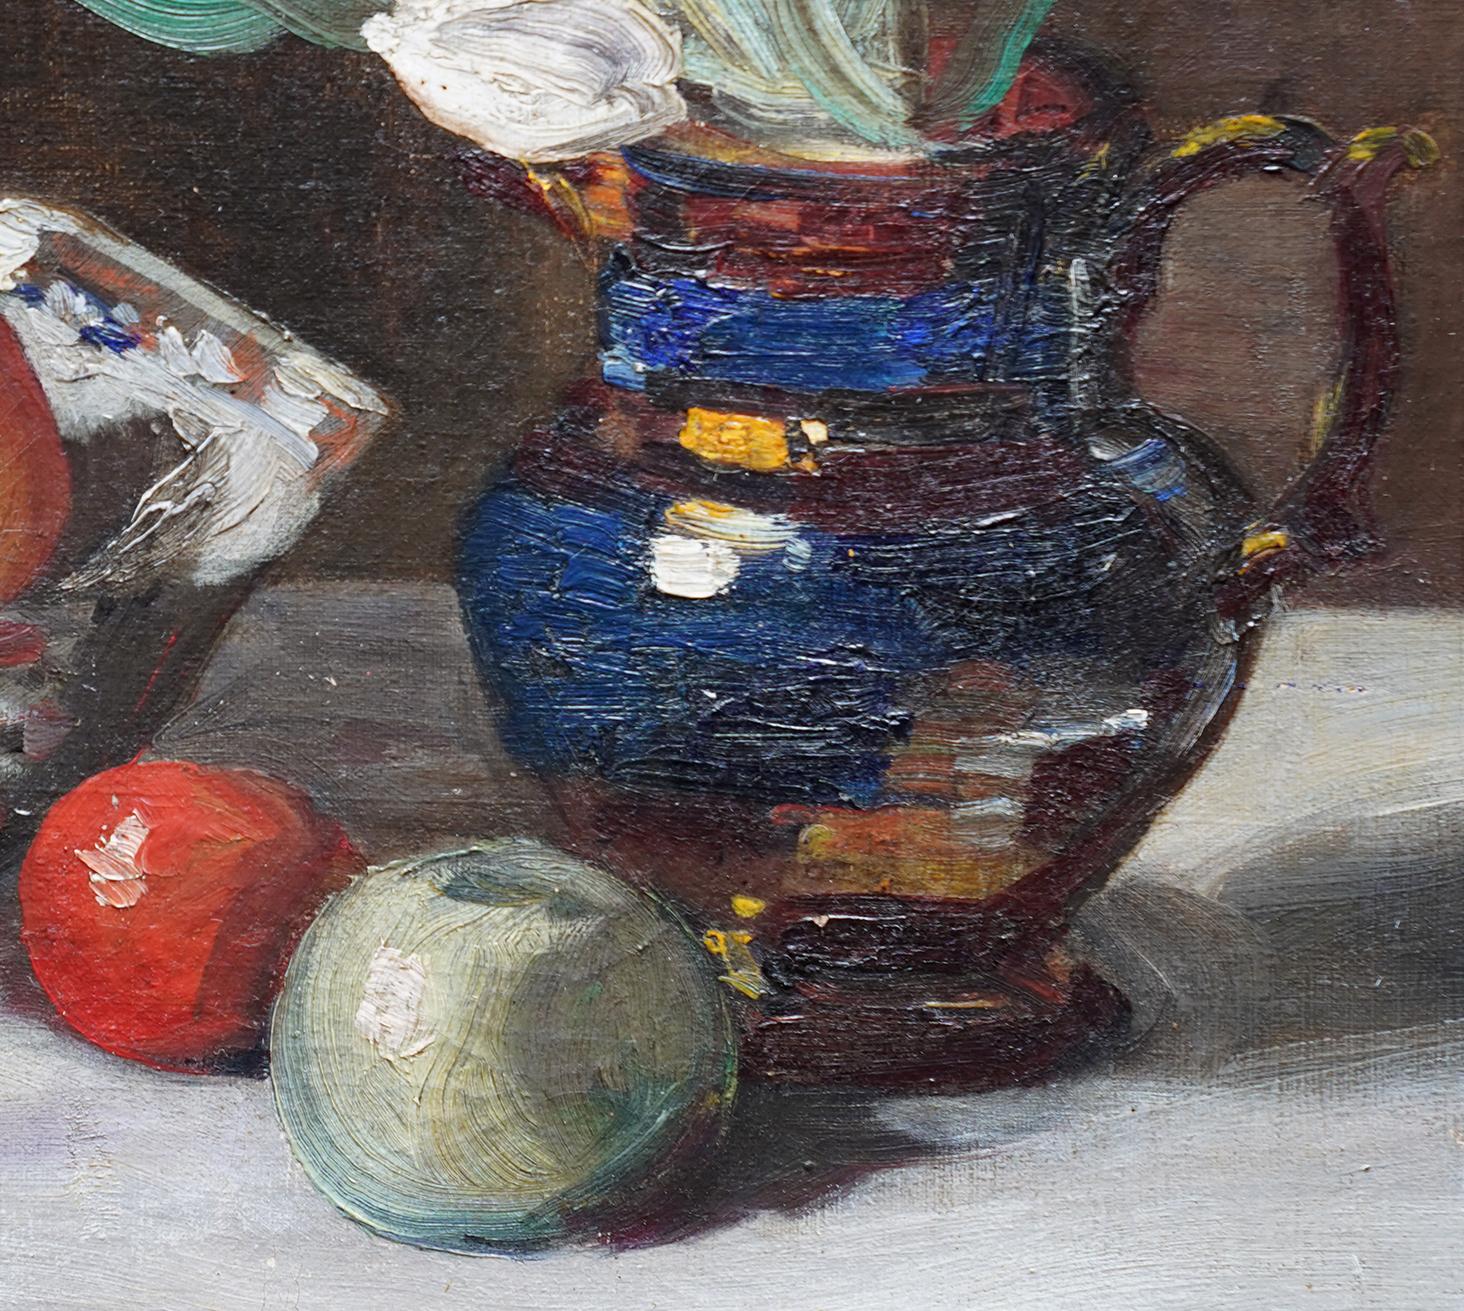 This superb British still life oil painting is attributed to circle of William Nicholson. Painted circa 1920 it is a really lush and vibrant composition of white tulips in a blue jug on a table beside fruit and an ornate glass. There is a wonderful